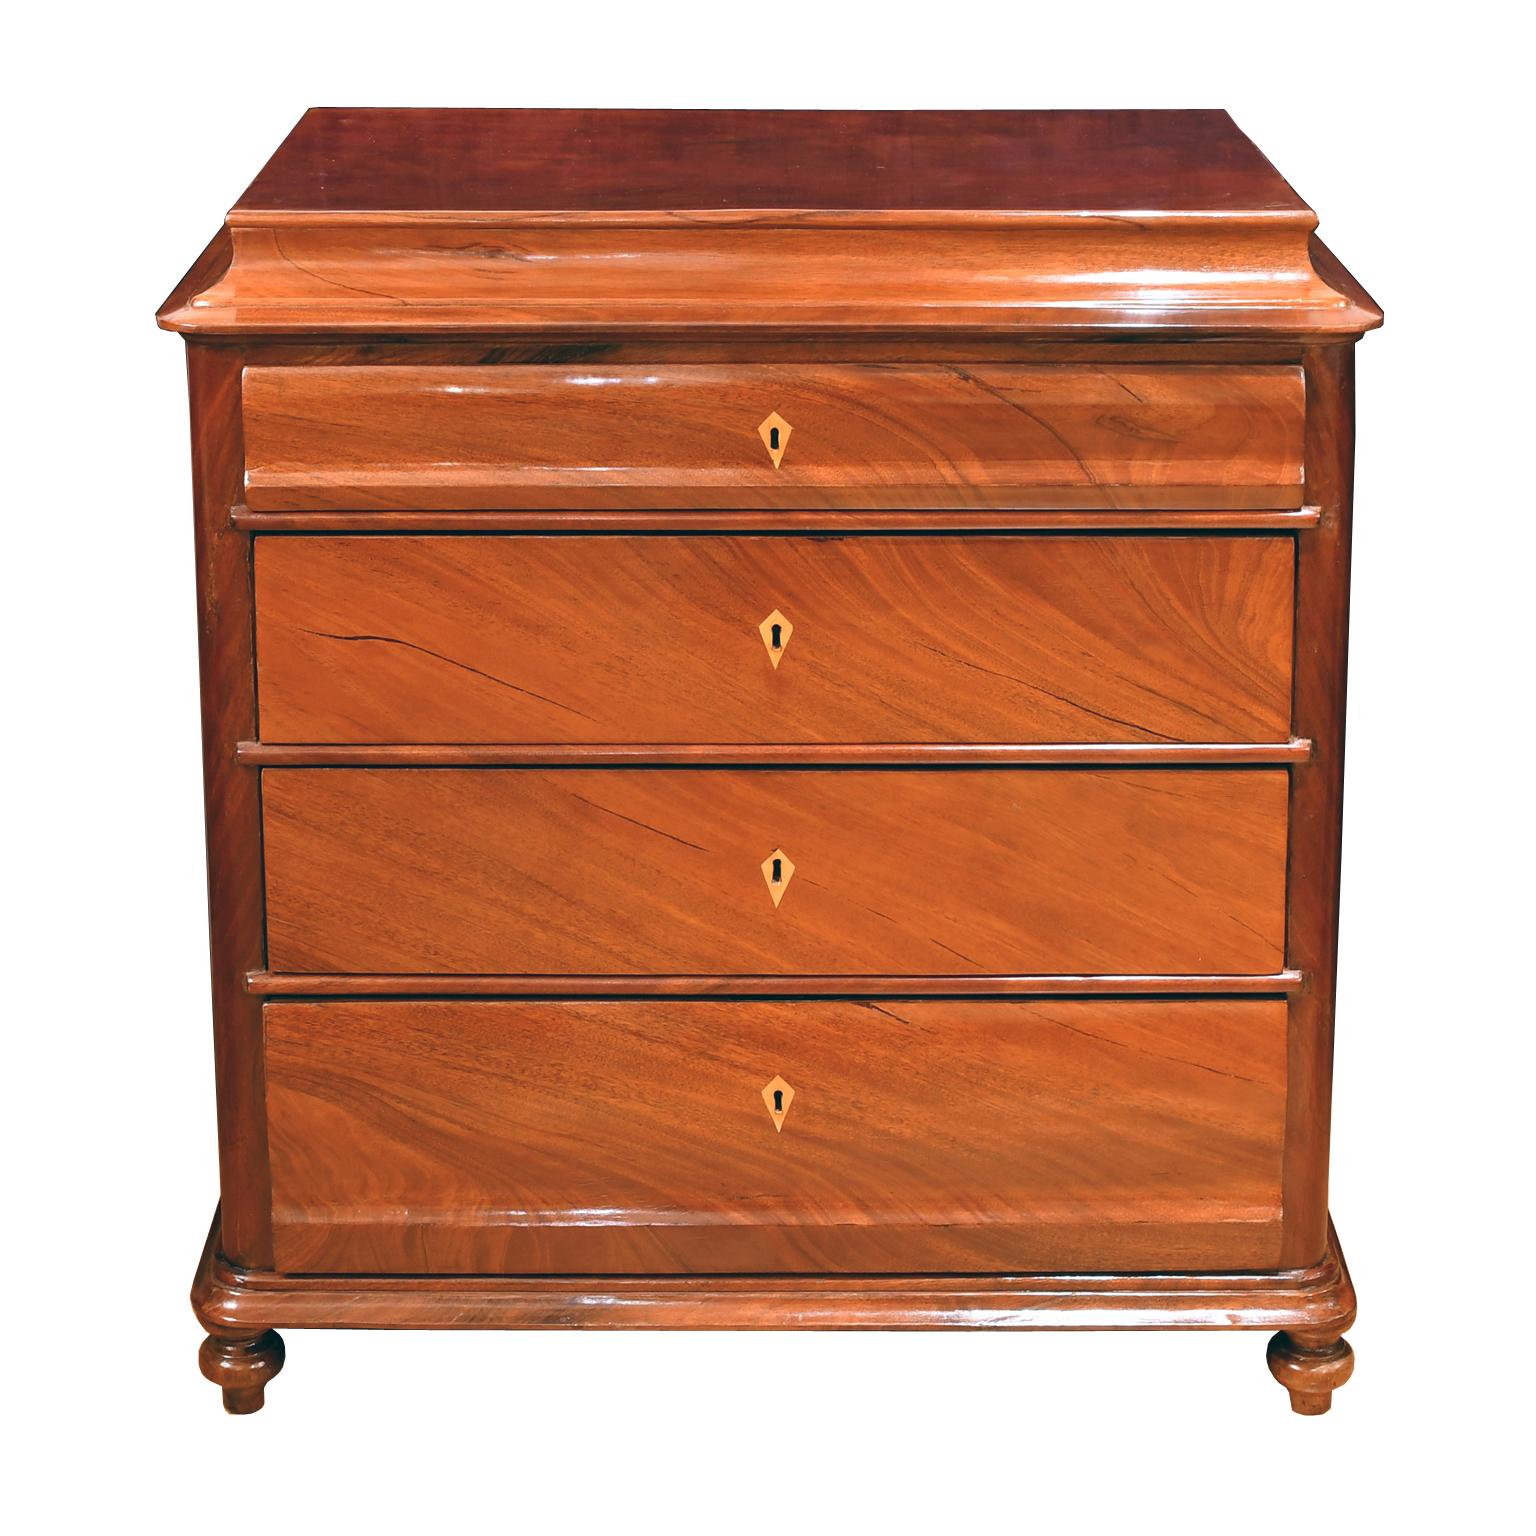 Antique Empire/ Biedermeier Chest of Drawers in West Indies Mahogany, Denmark